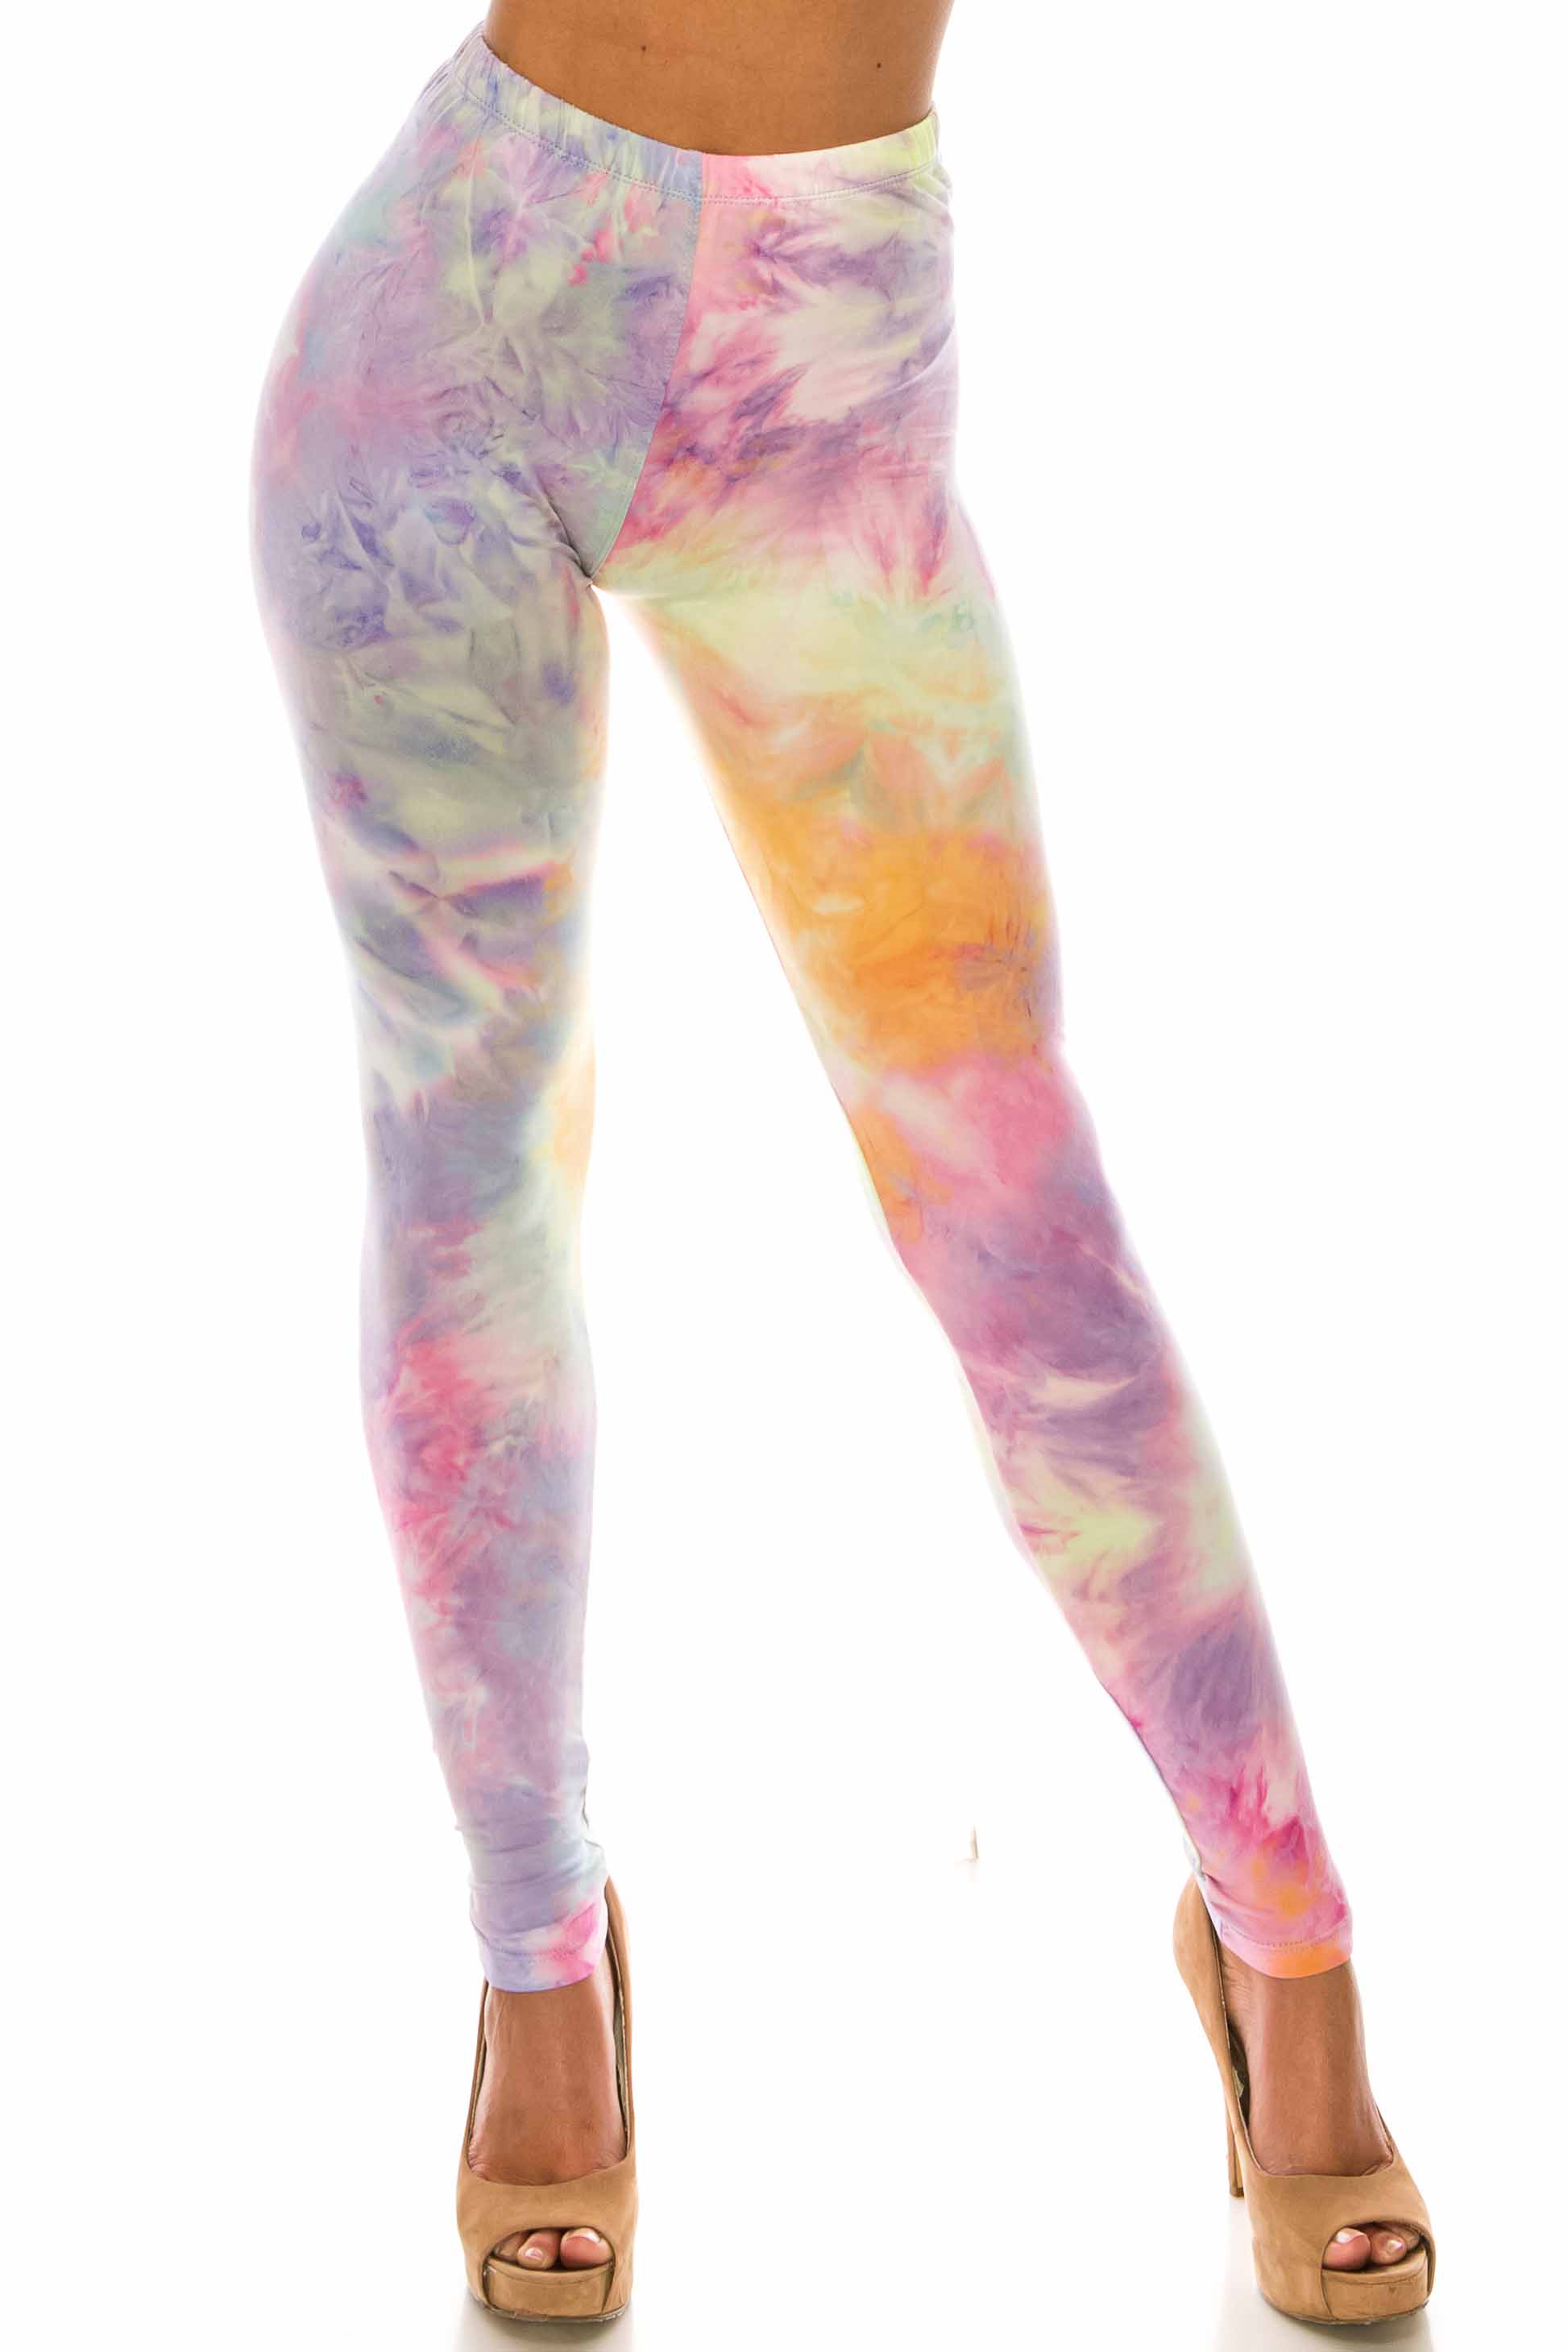 Wholesale Buttery Smooth Multi-Color Pastel Tie Dye Extra Plus Size Leggings - 3X-5X